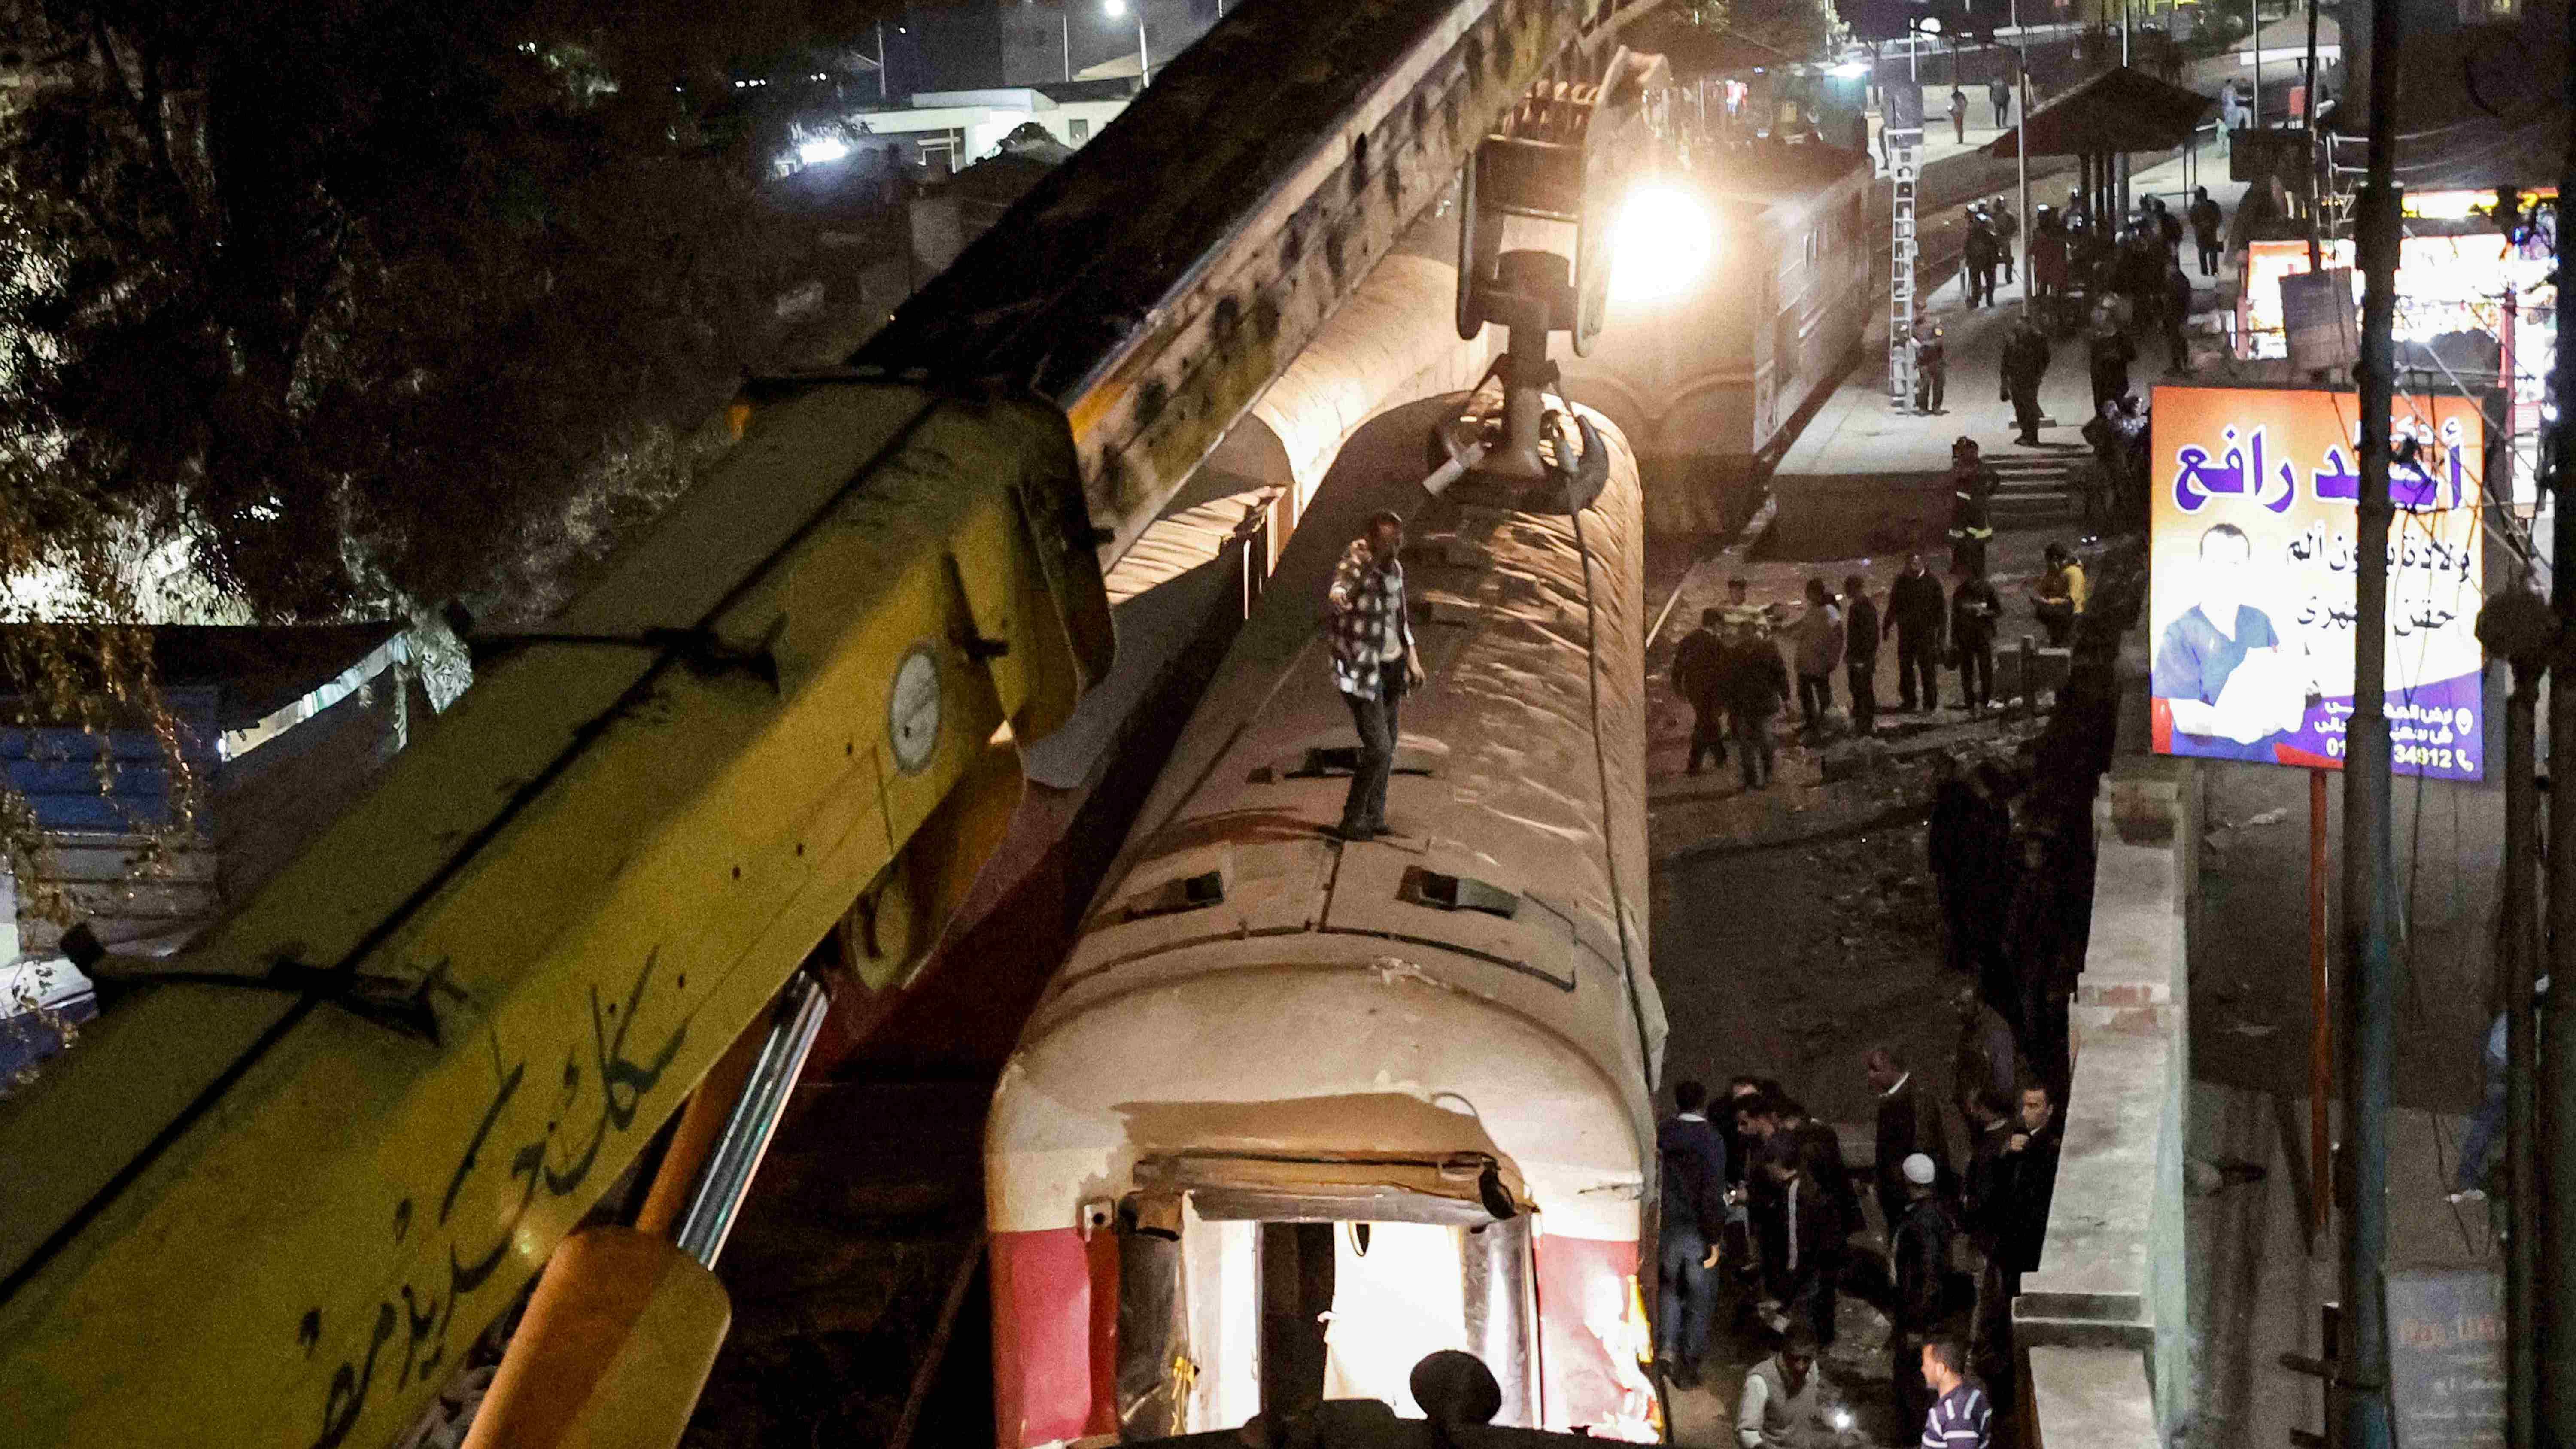 A crane is deployed to lift a derailed train at the scene of a railroad accident in the city of Qalyub in Qalyub province, in Egypt's Nile delta region north of the capital. Credit: AFP Photo